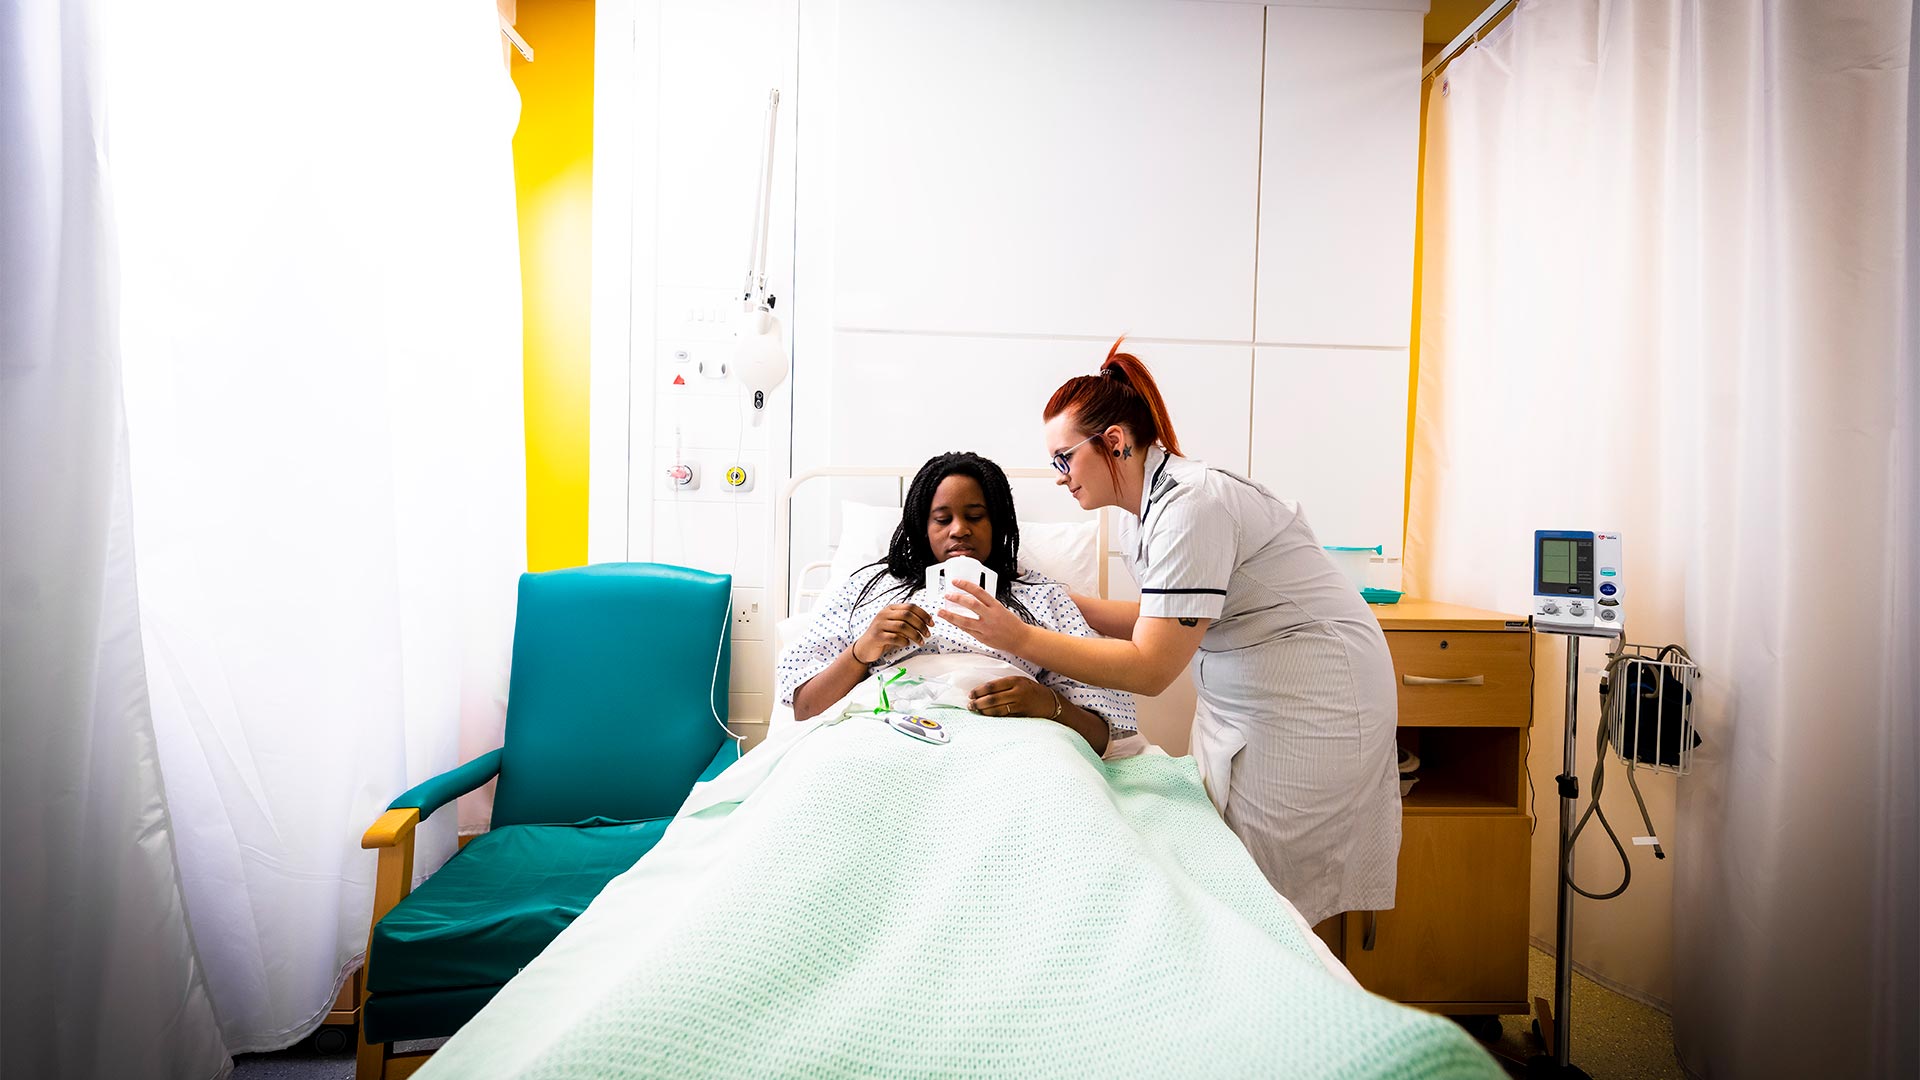 A student in a mock ward role-playing with a patient.